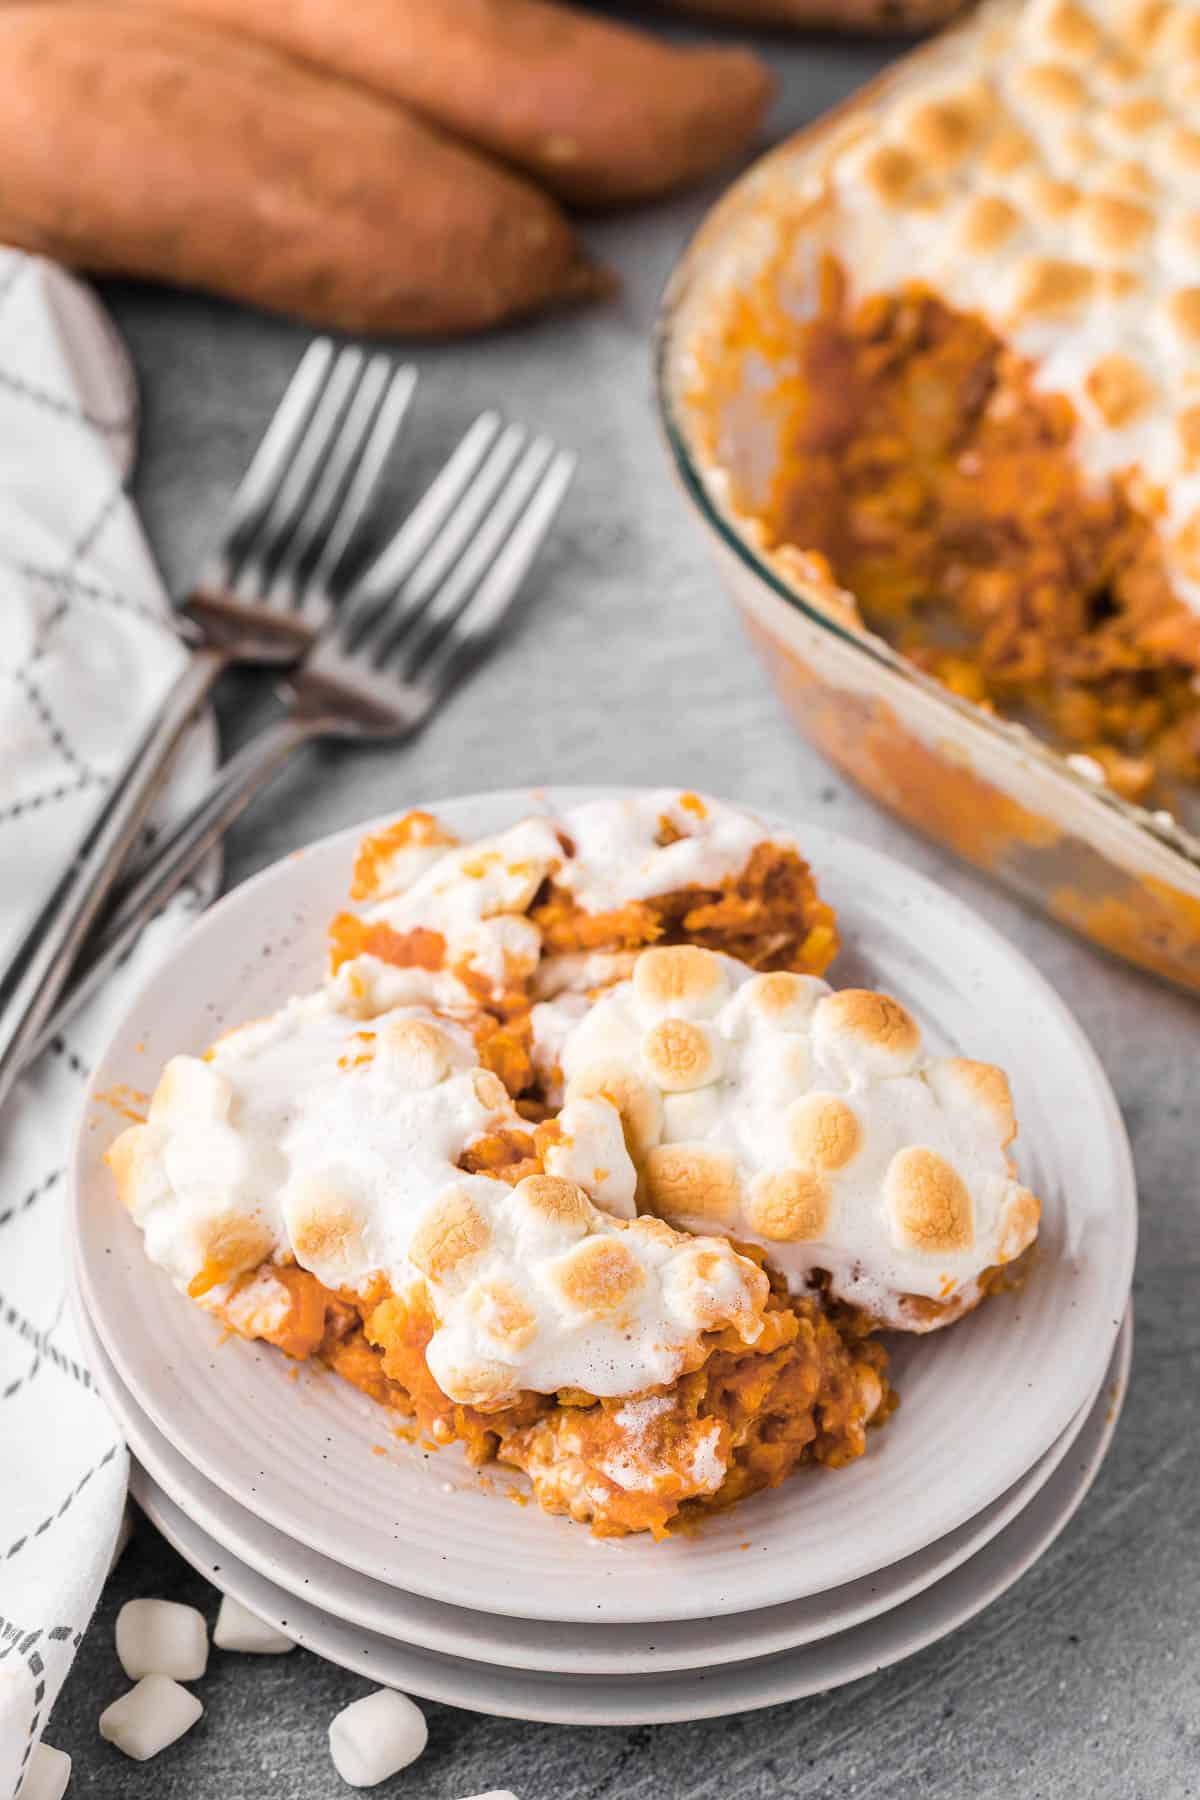 sweet potato casserole on plate for thanksgiving.